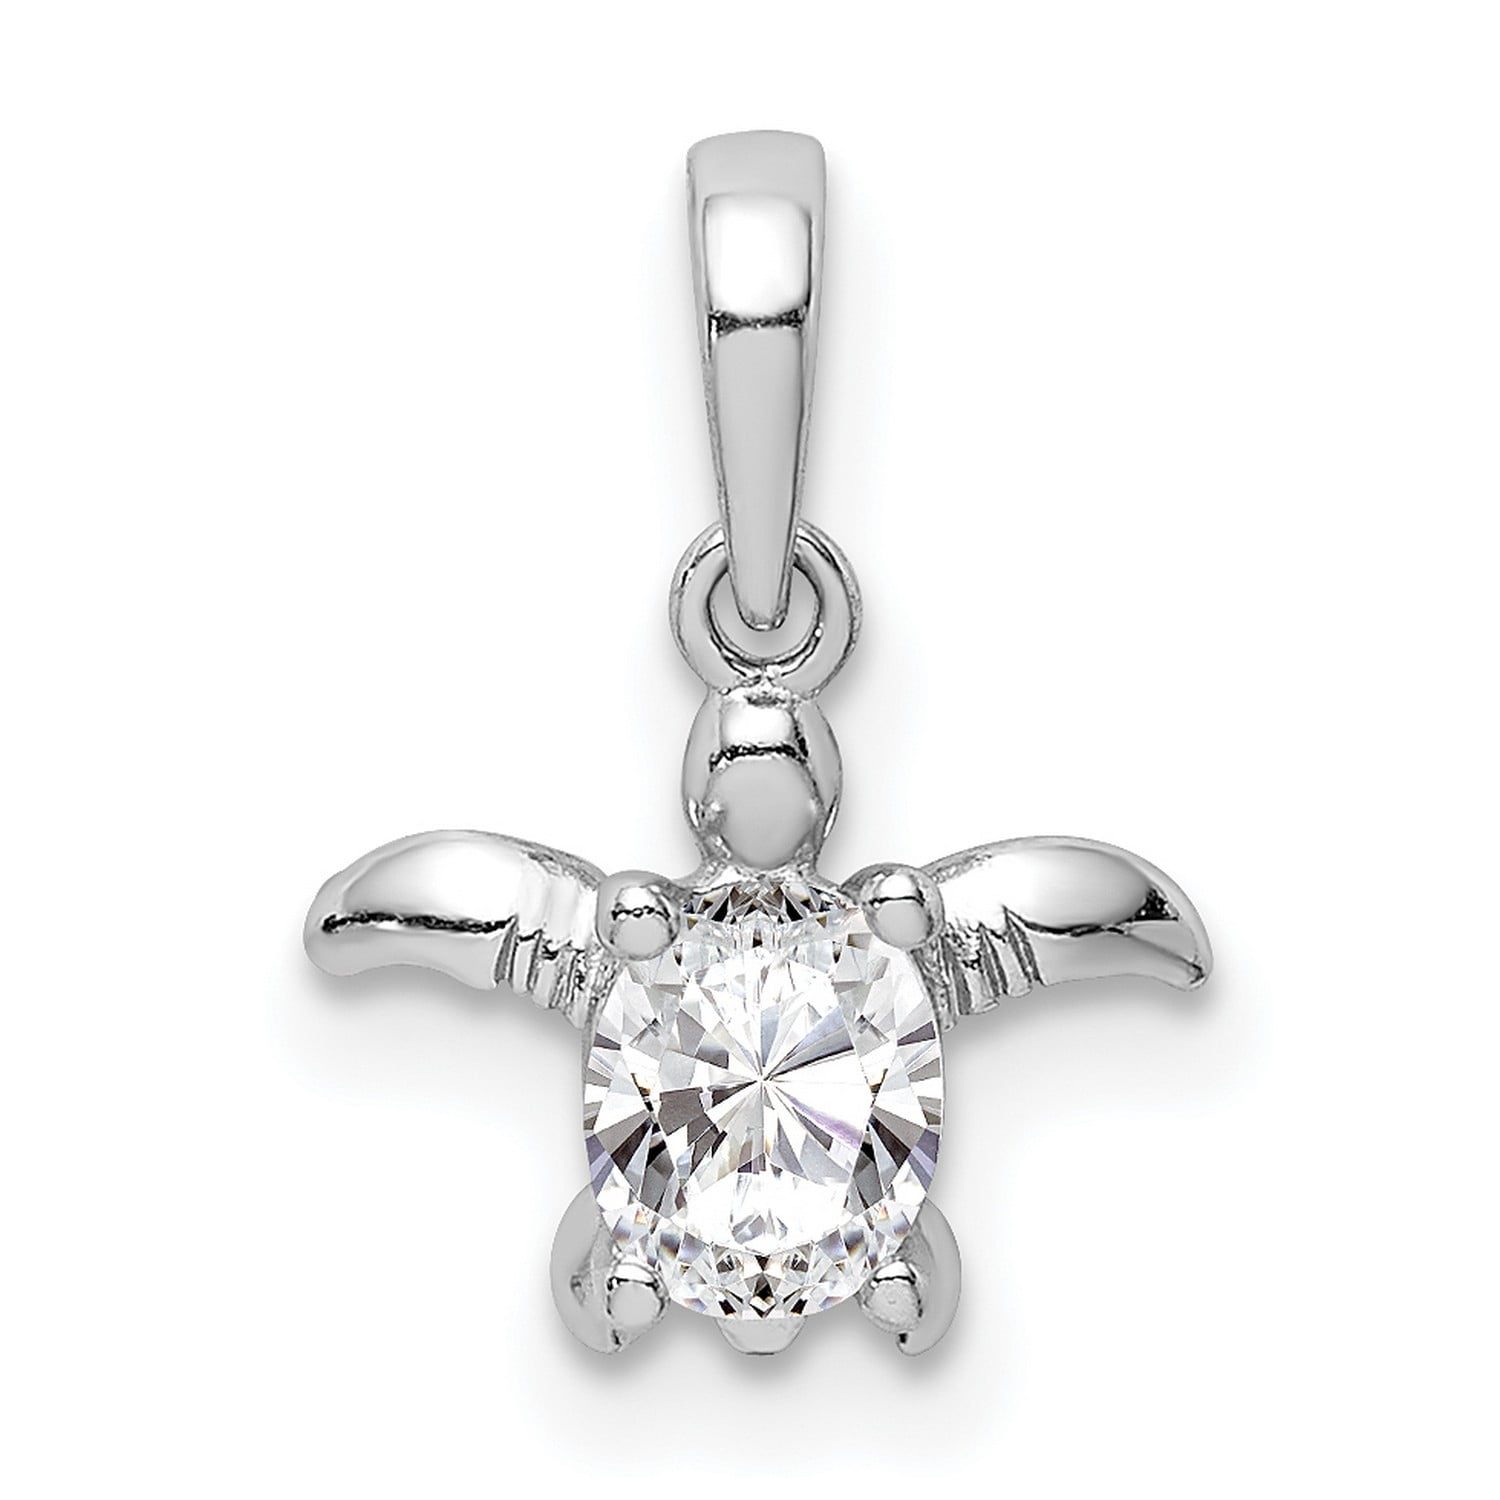 Solid 925 Sterling Silver CZ Cubic Zirconia Turtle Pendant Charm 8mm x 10mm 